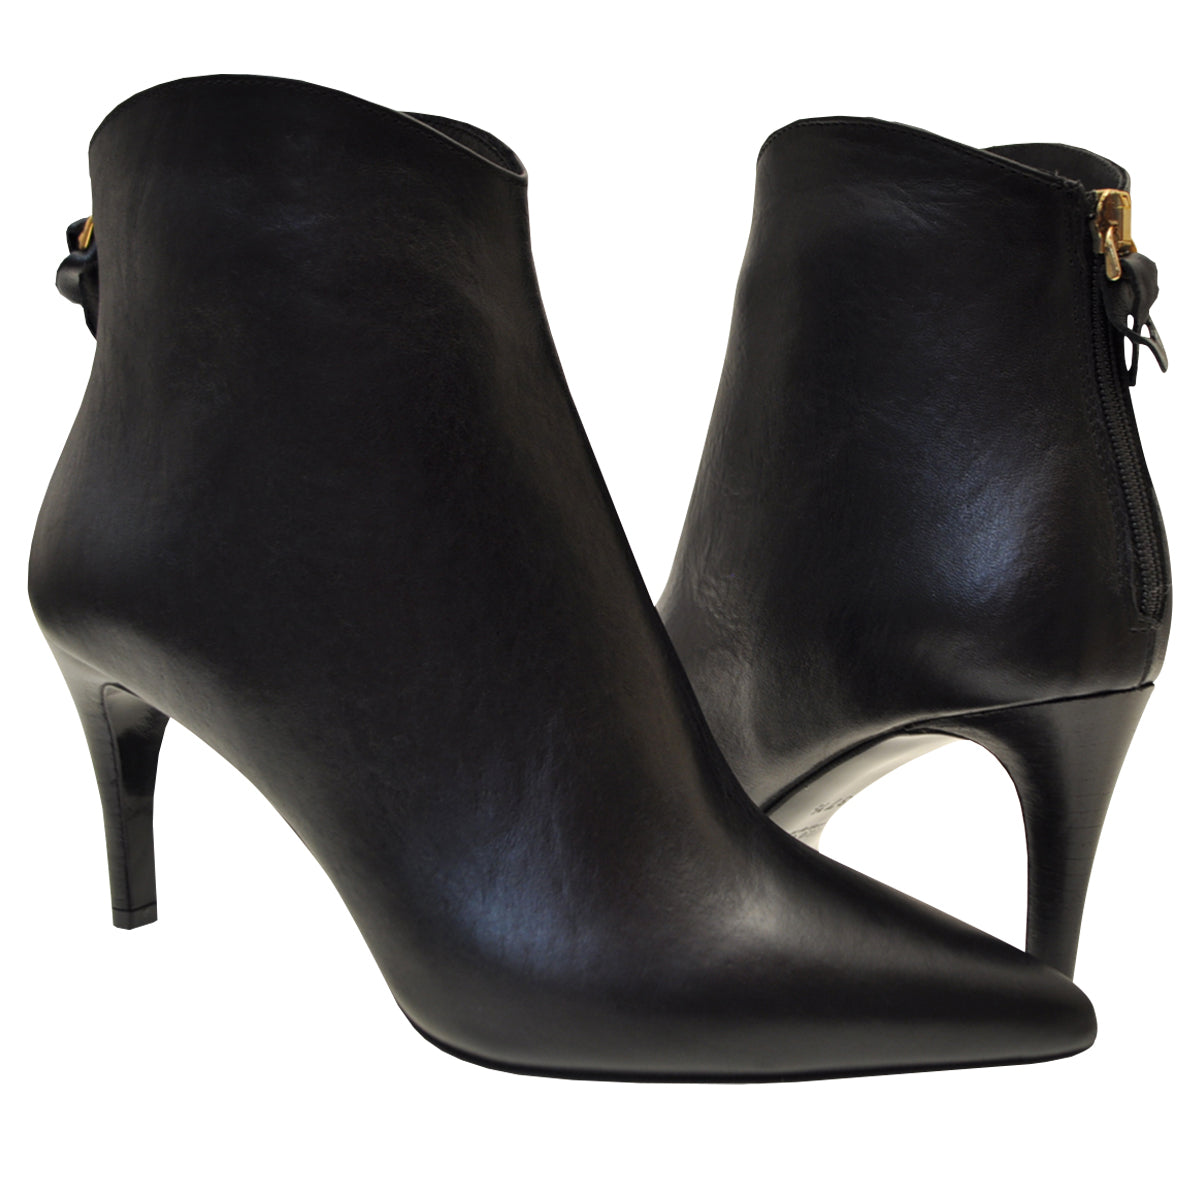 Black ankle boots with stiletto heel. 